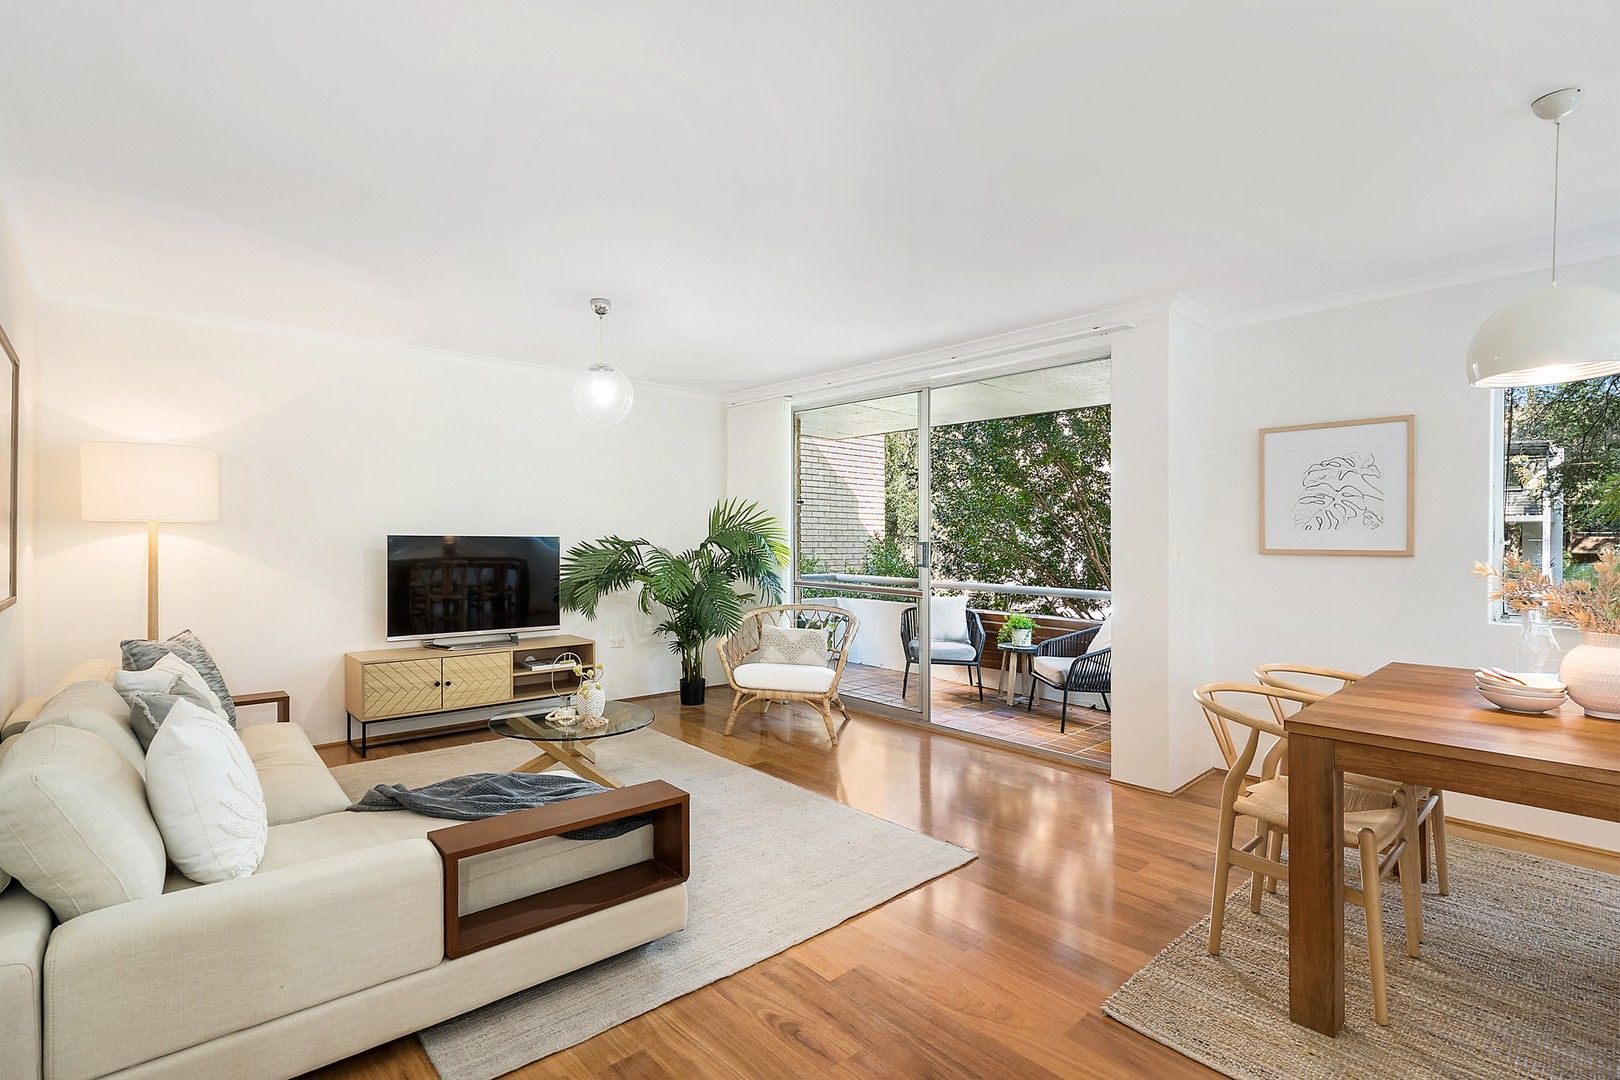 2 bedrooms Apartment / Unit / Flat in 9/390 Miller Street CAMMERAY NSW, 2062